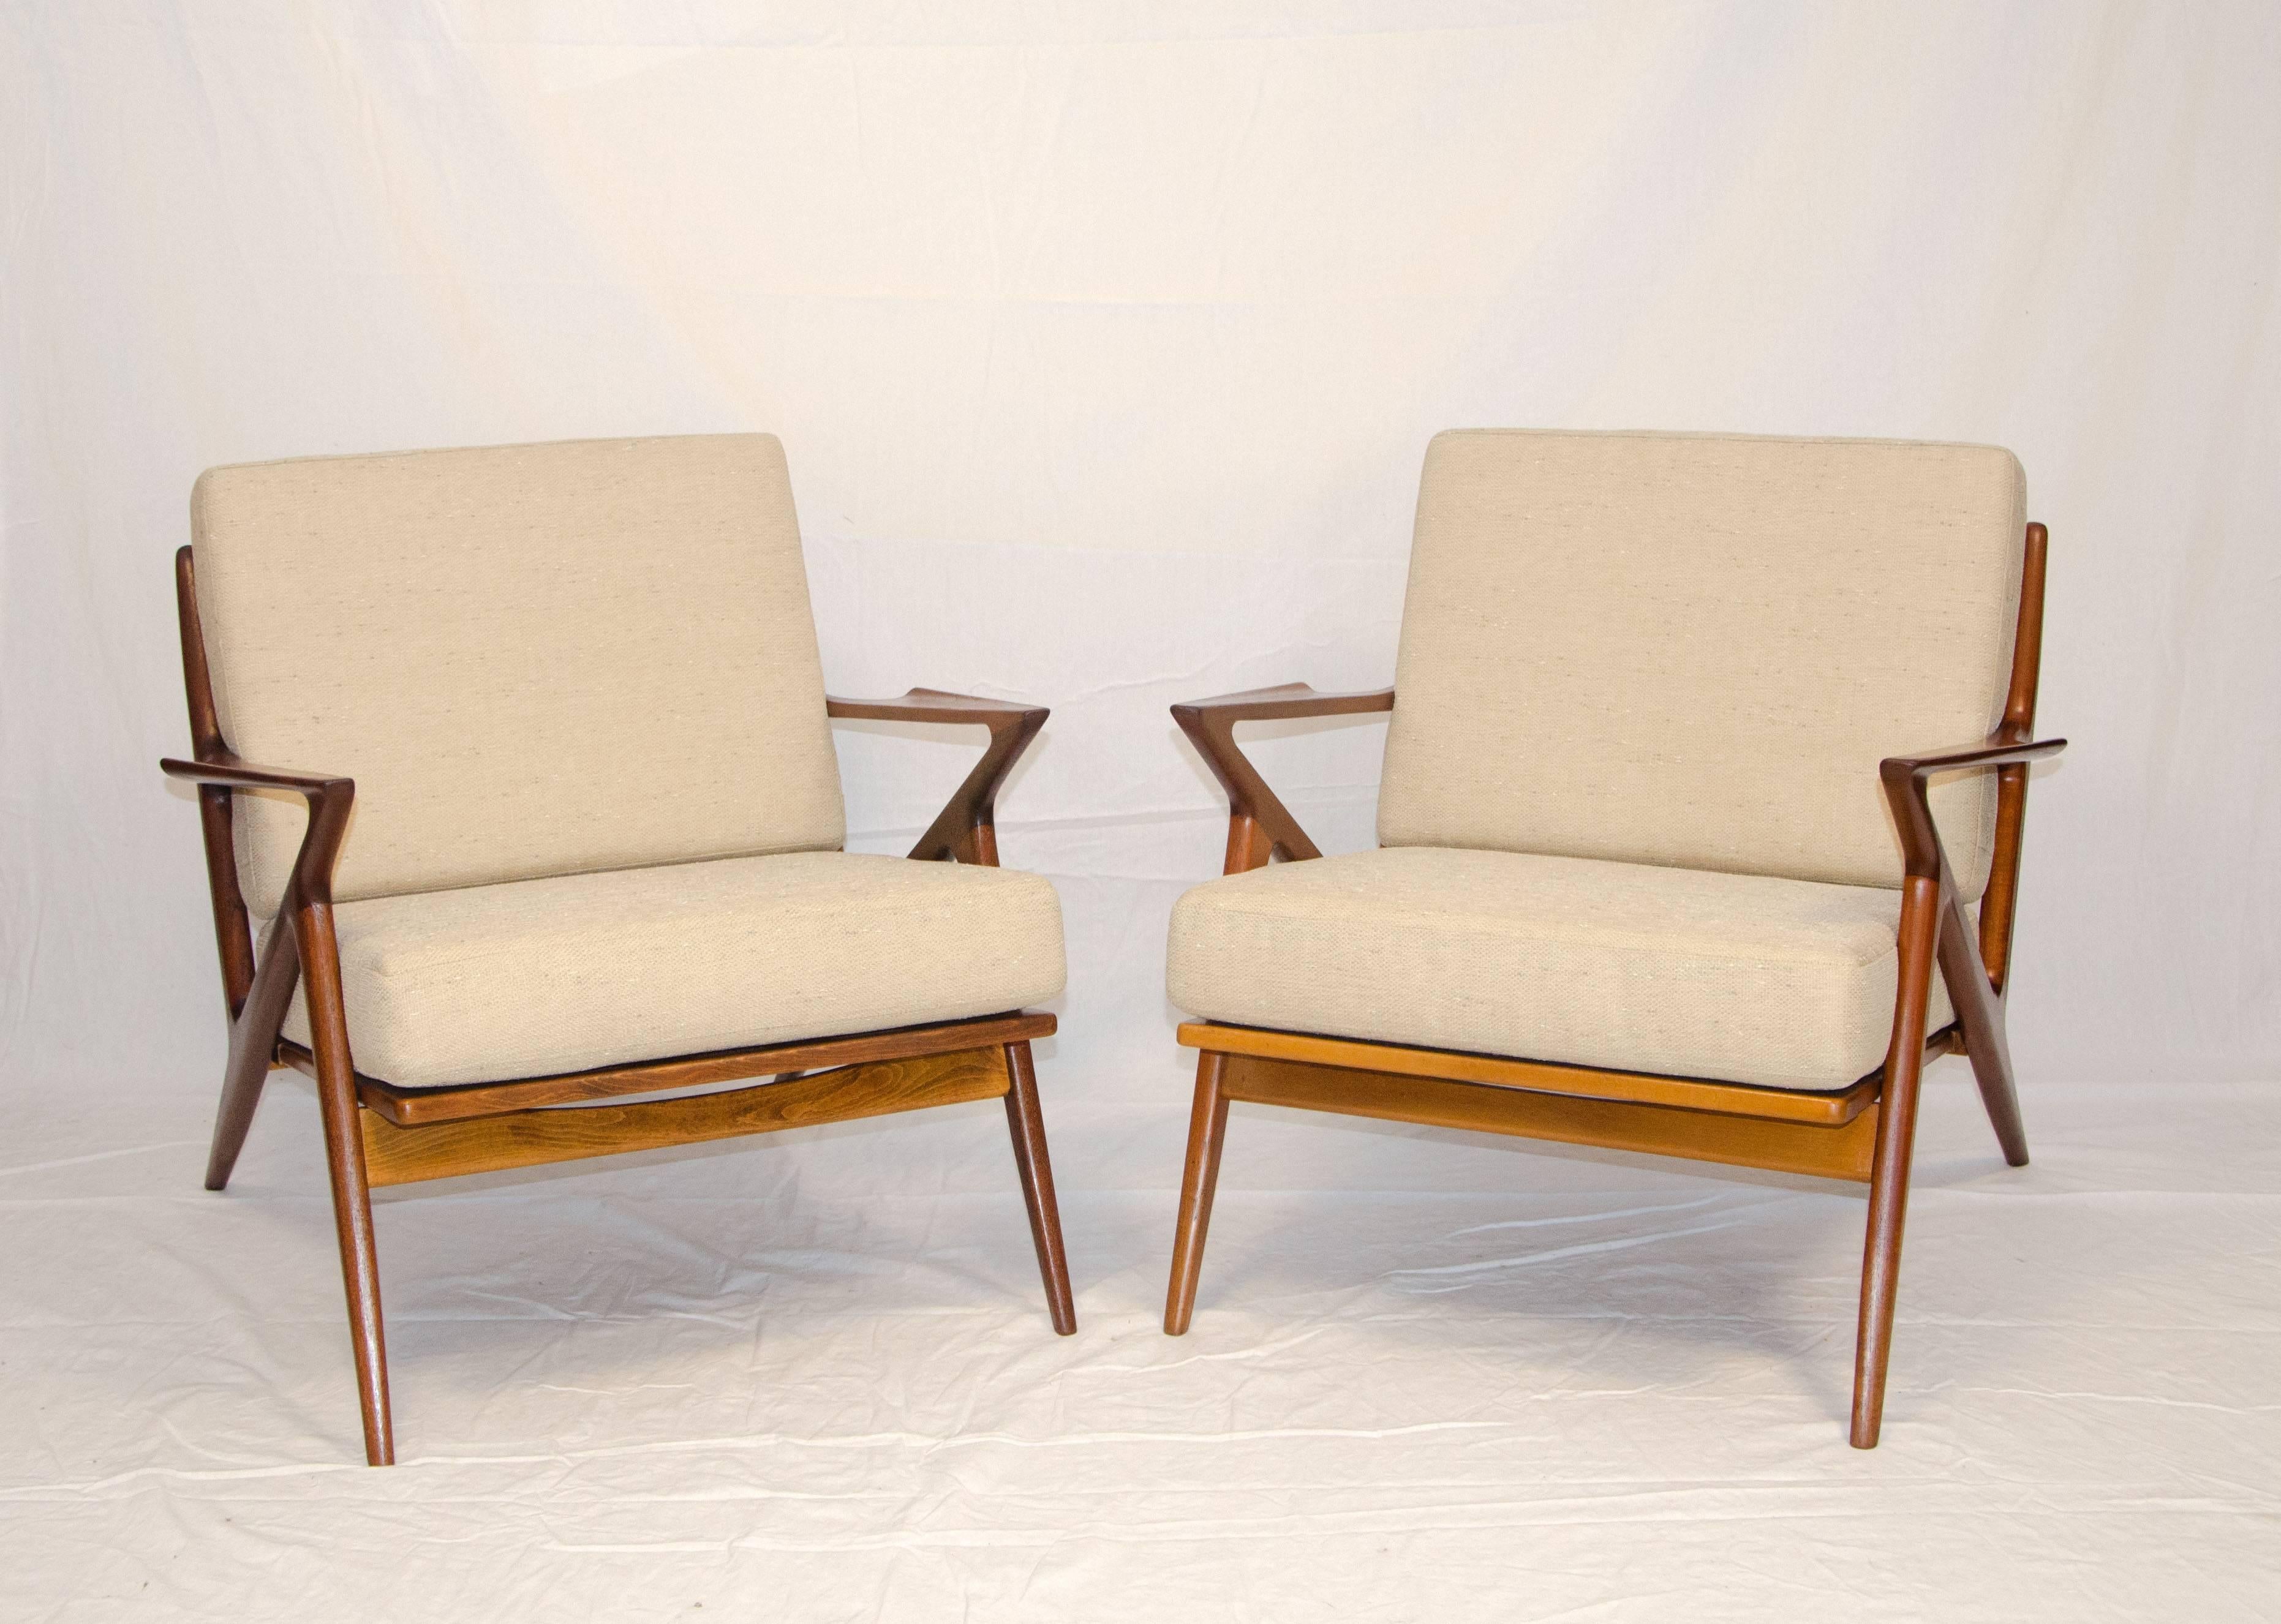 Stylish pair of Danish Z lounge chairs designed by Poul Jensen and manufactured by Selig. These chairs are identical in all ways except for the strapping under the seat cushion. Selig tag only on one chair.